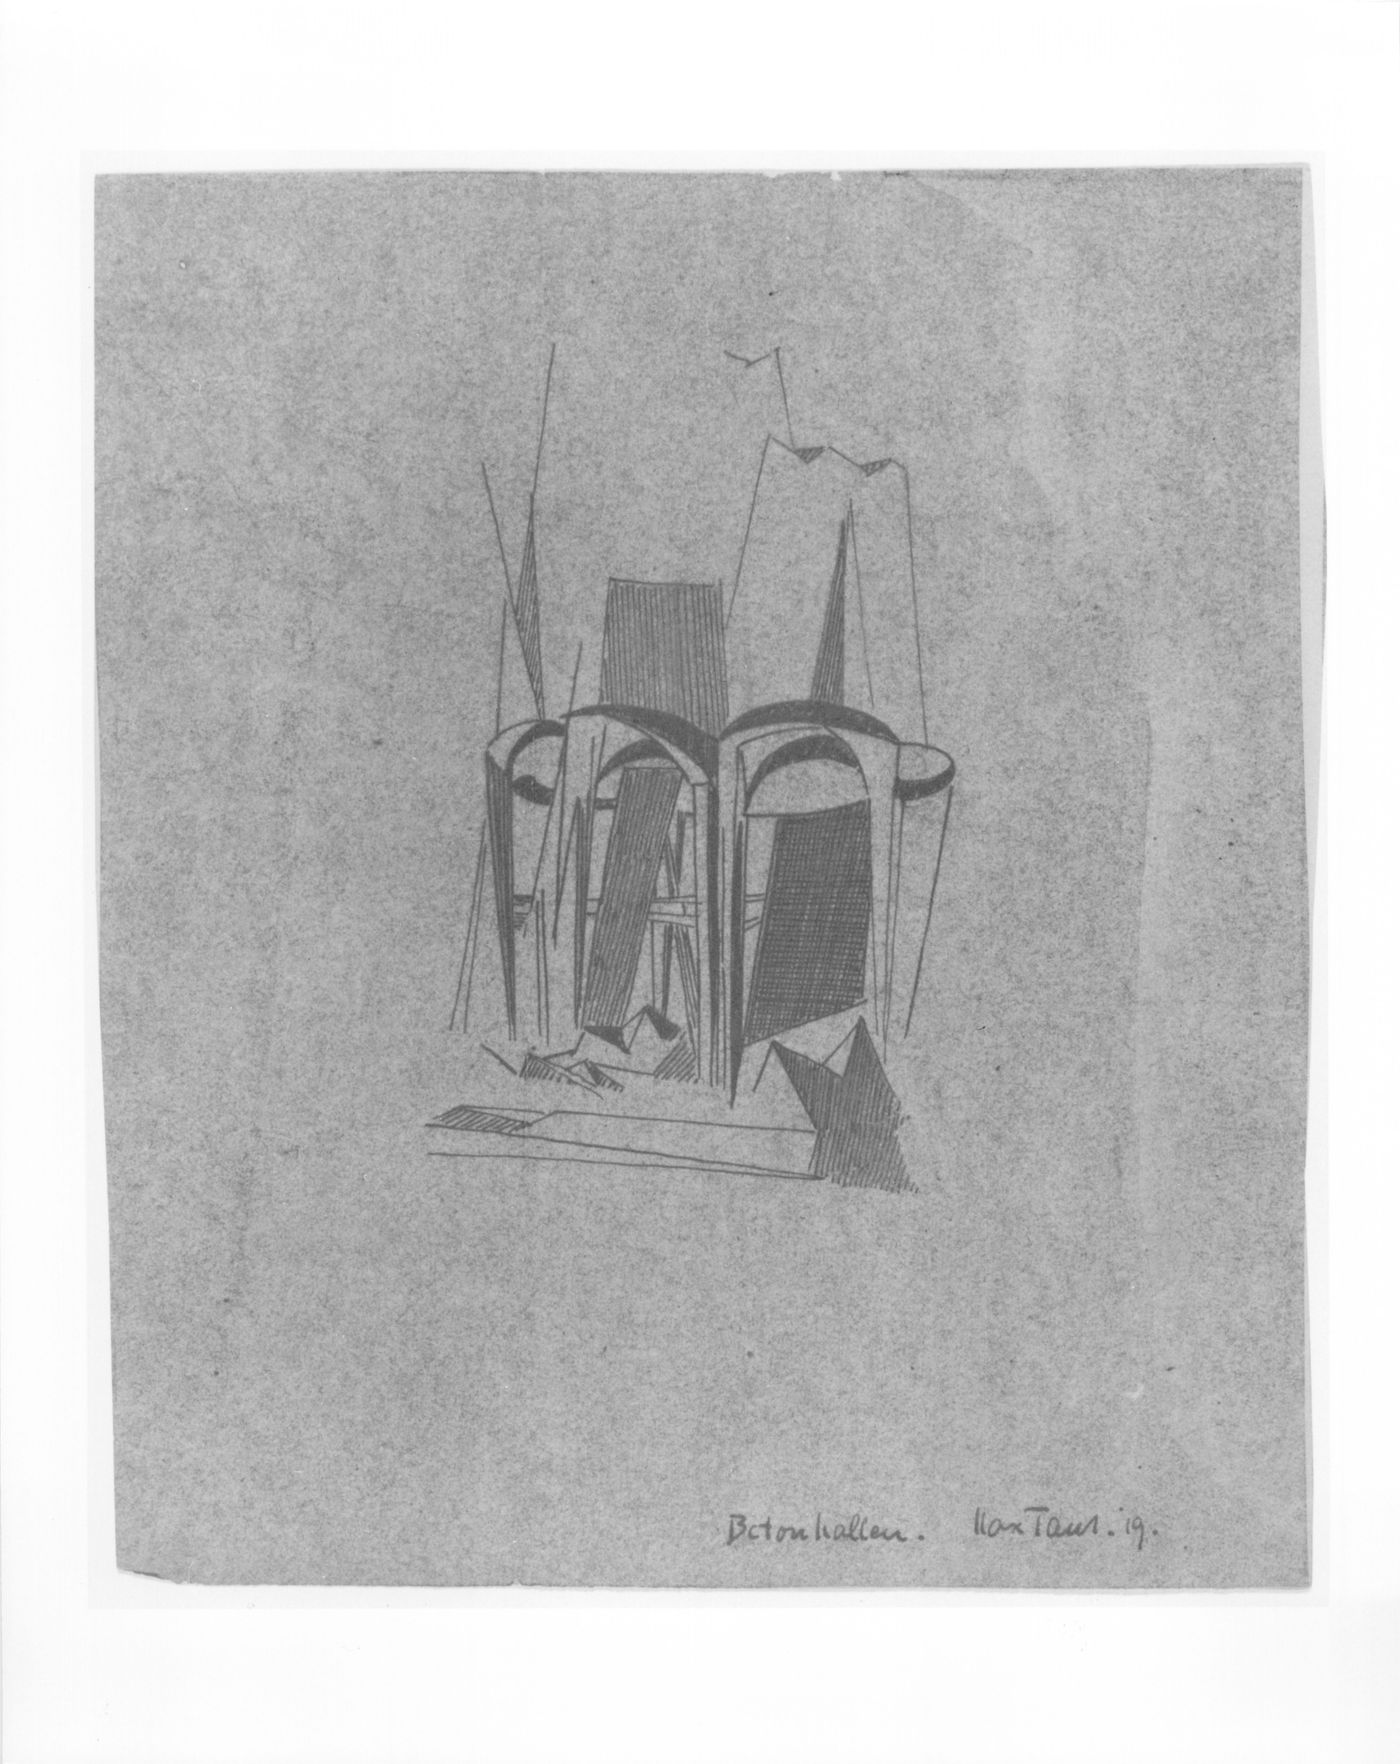 Drawing of an unidentified structure by Max Taut